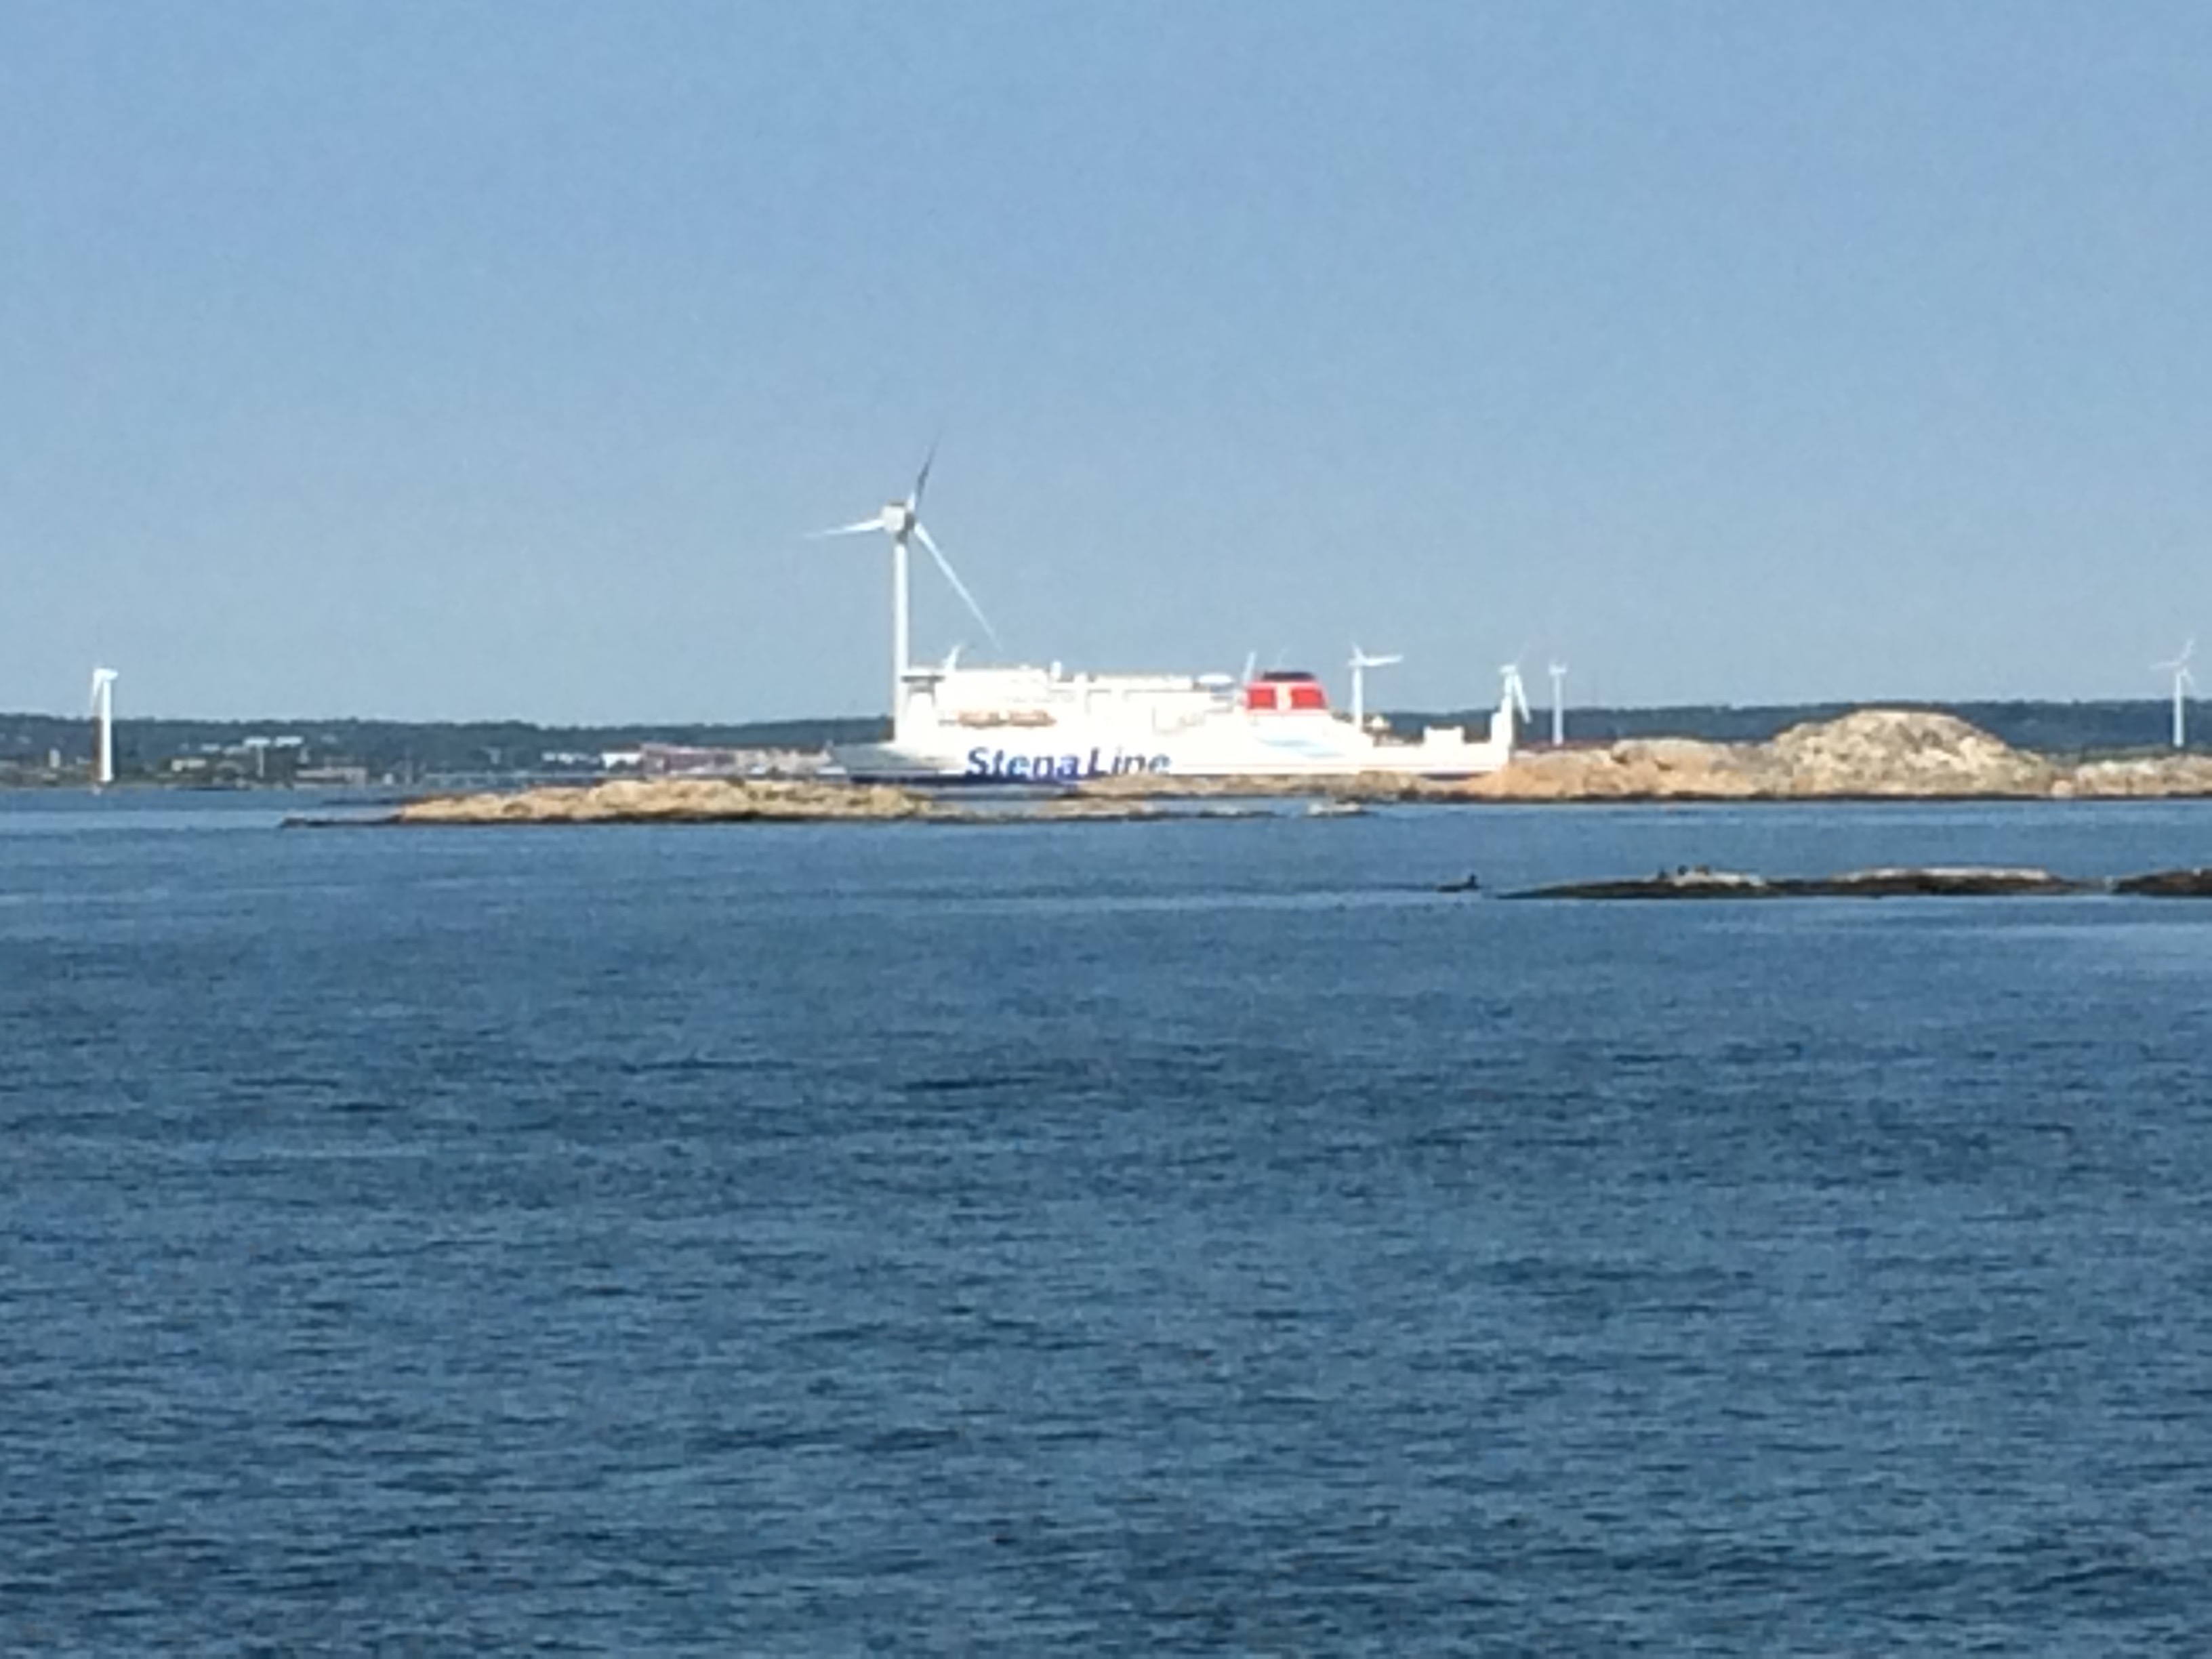 The Stena boat kept popping out from behind little islands